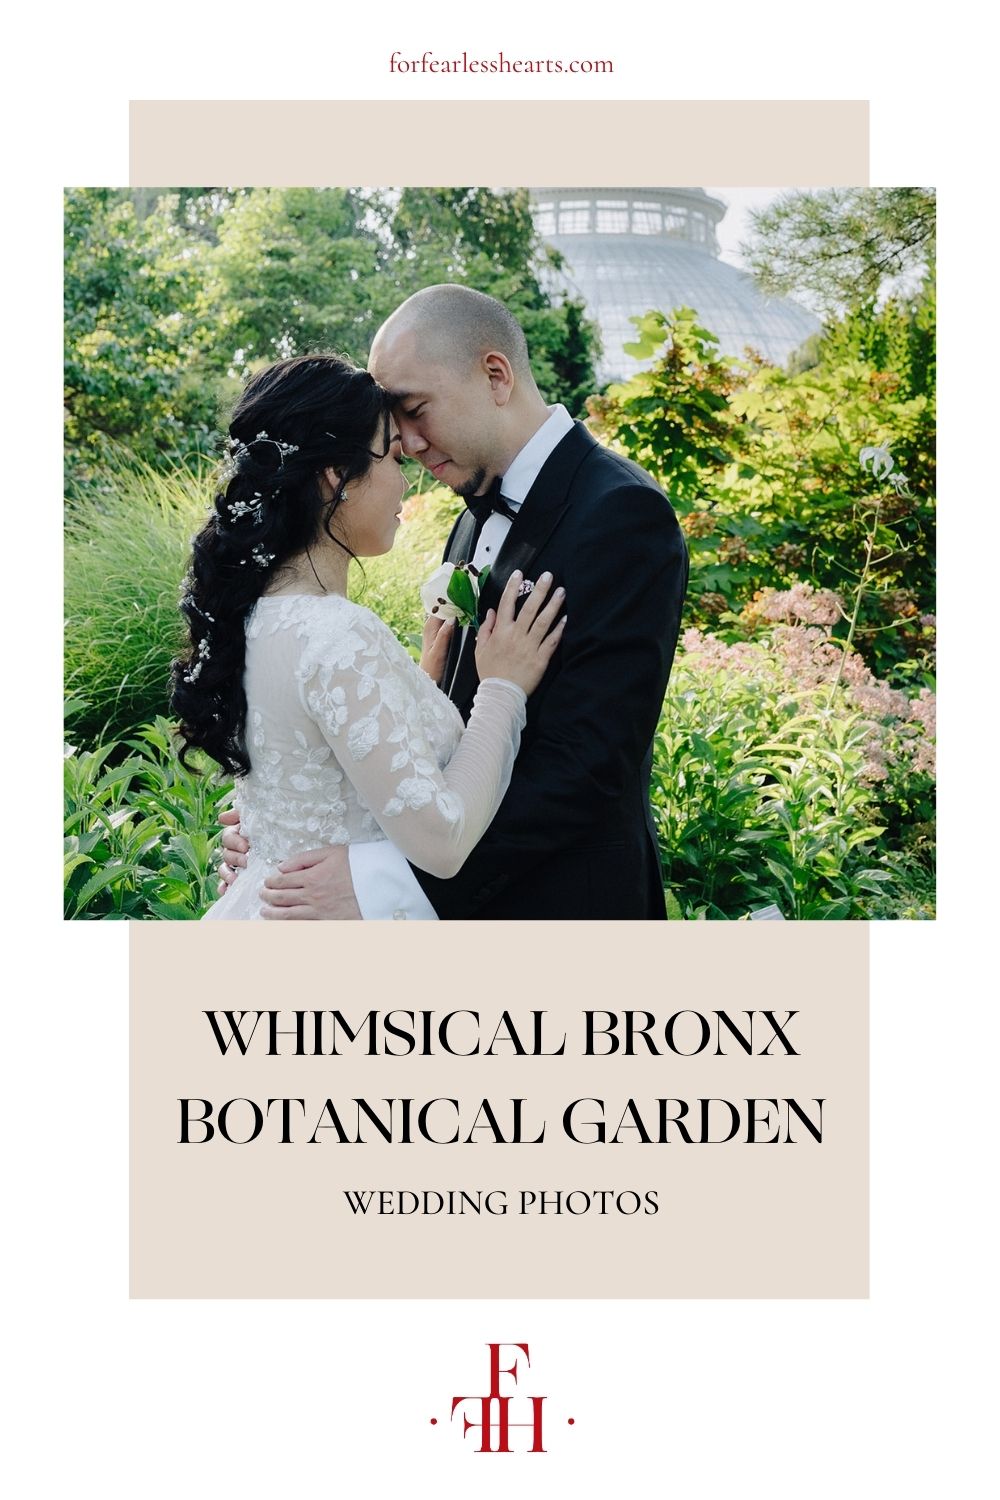 Bride and groom pressing their foreheads against each other during their wedding shoot; image overlaid with text that reads Whimsical Bronx Botanical Garden Wedding Photos